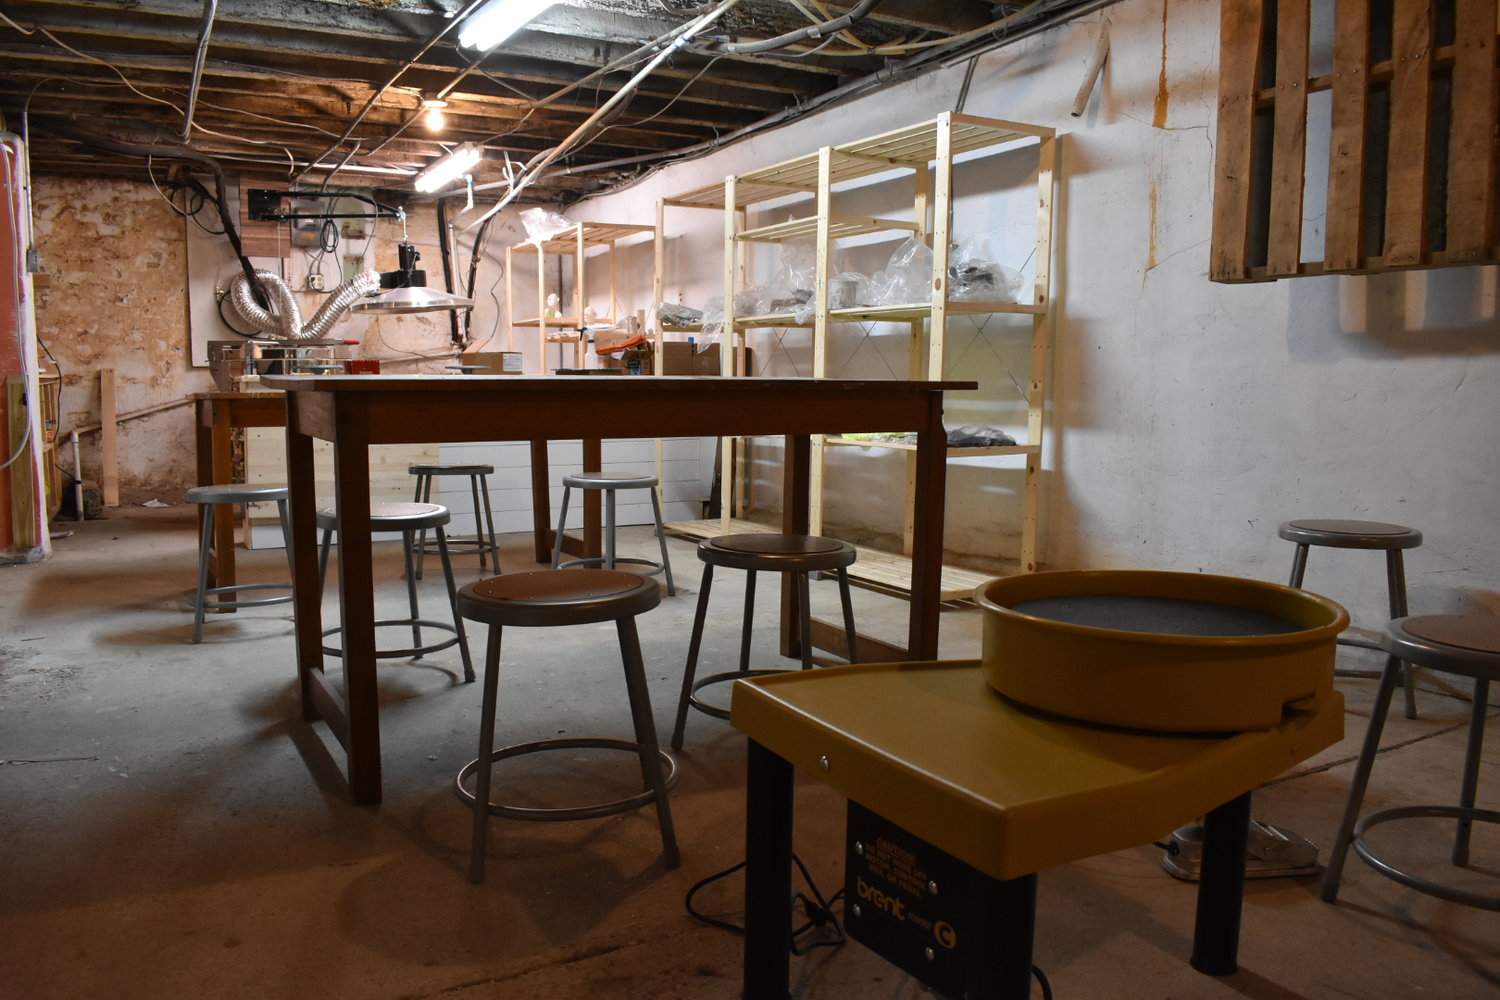 The pottery studio at The 567 Center — The 567 Center